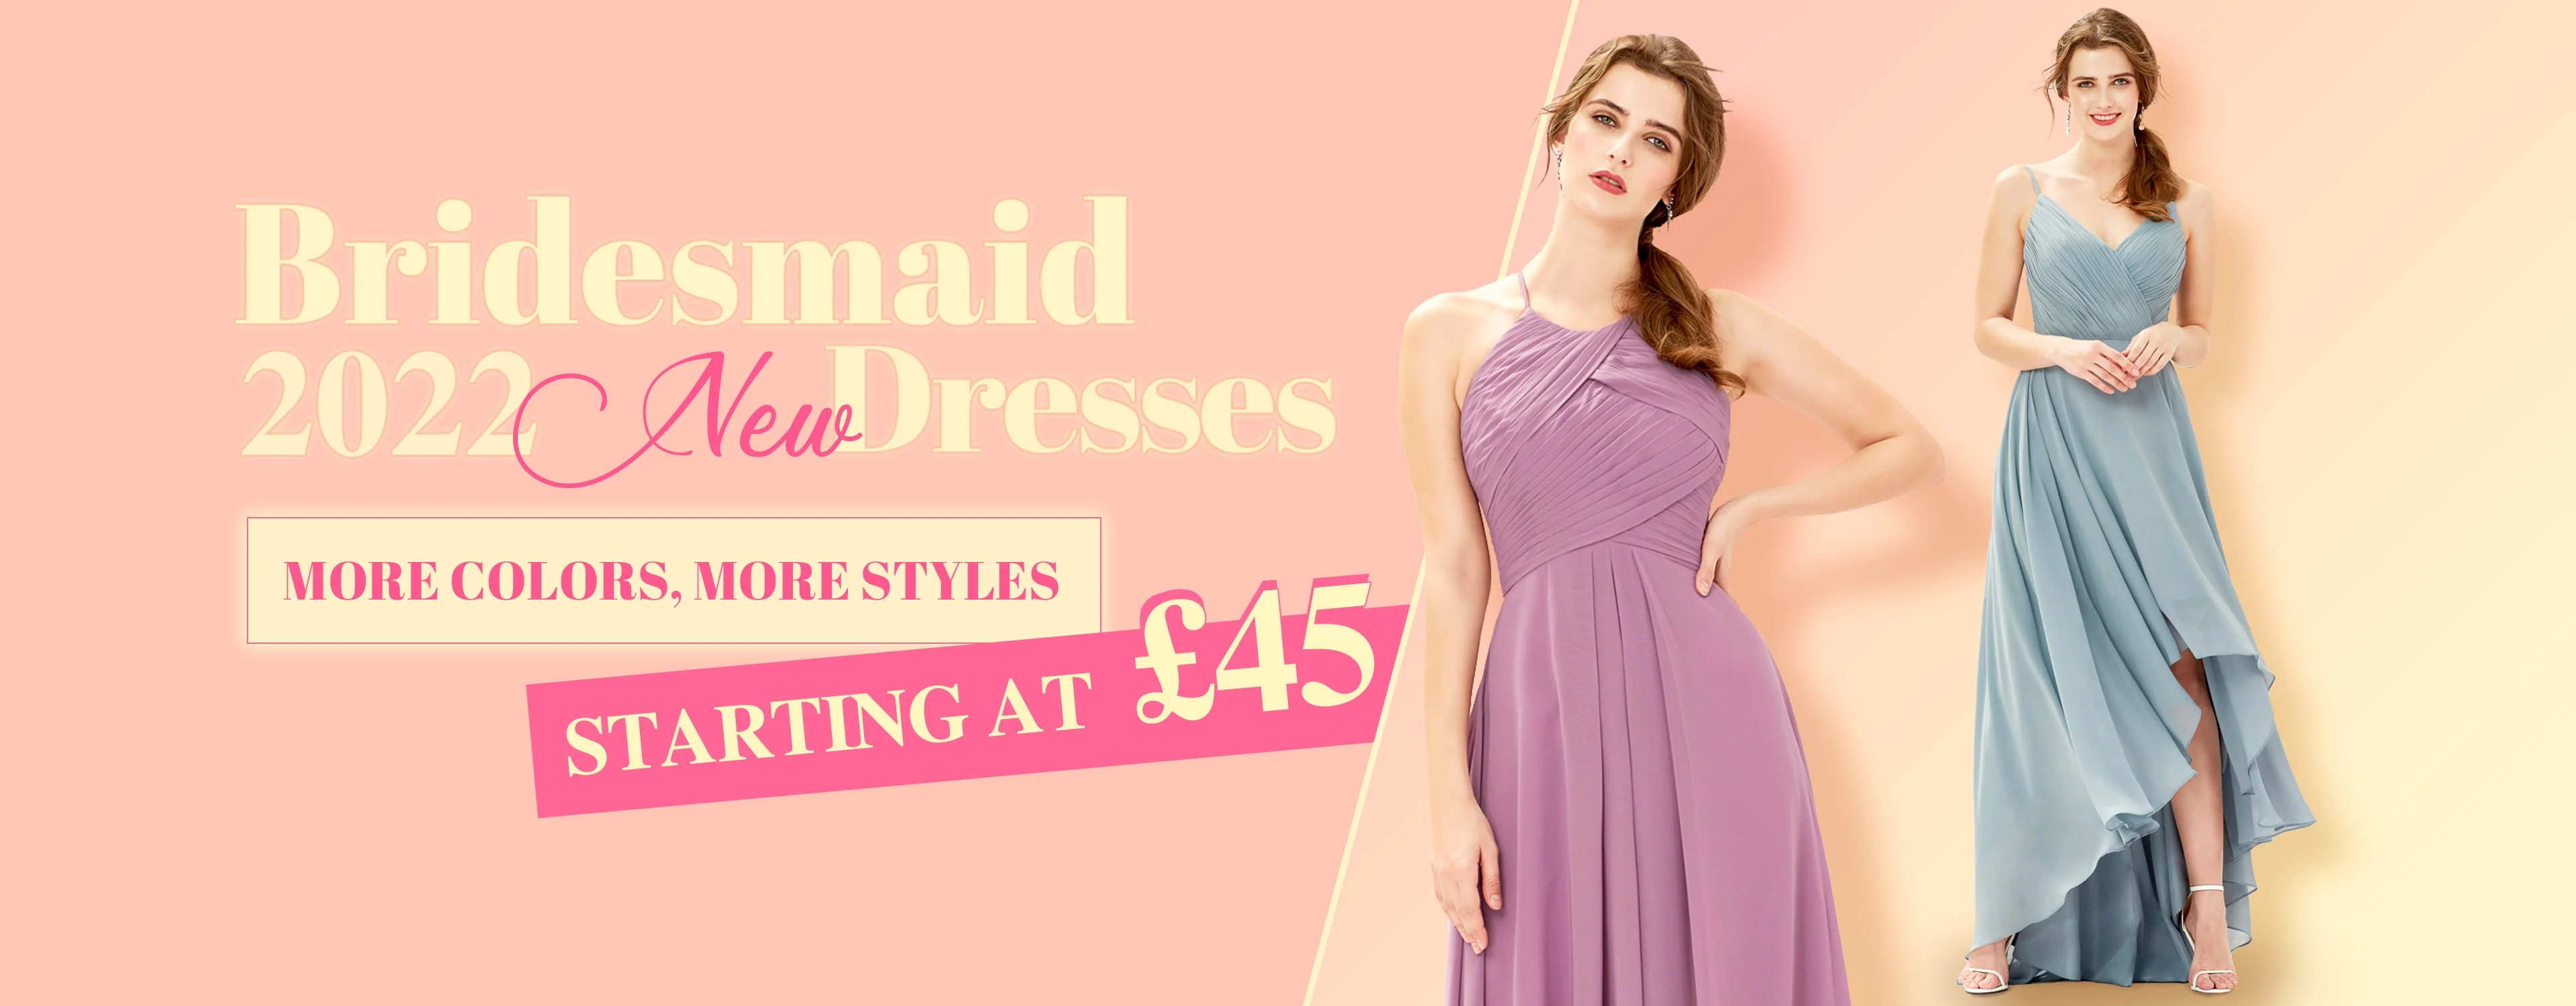 4 Sweet Vintage-Style Bridesmaid Dresses Your Friends Will Love to Wear